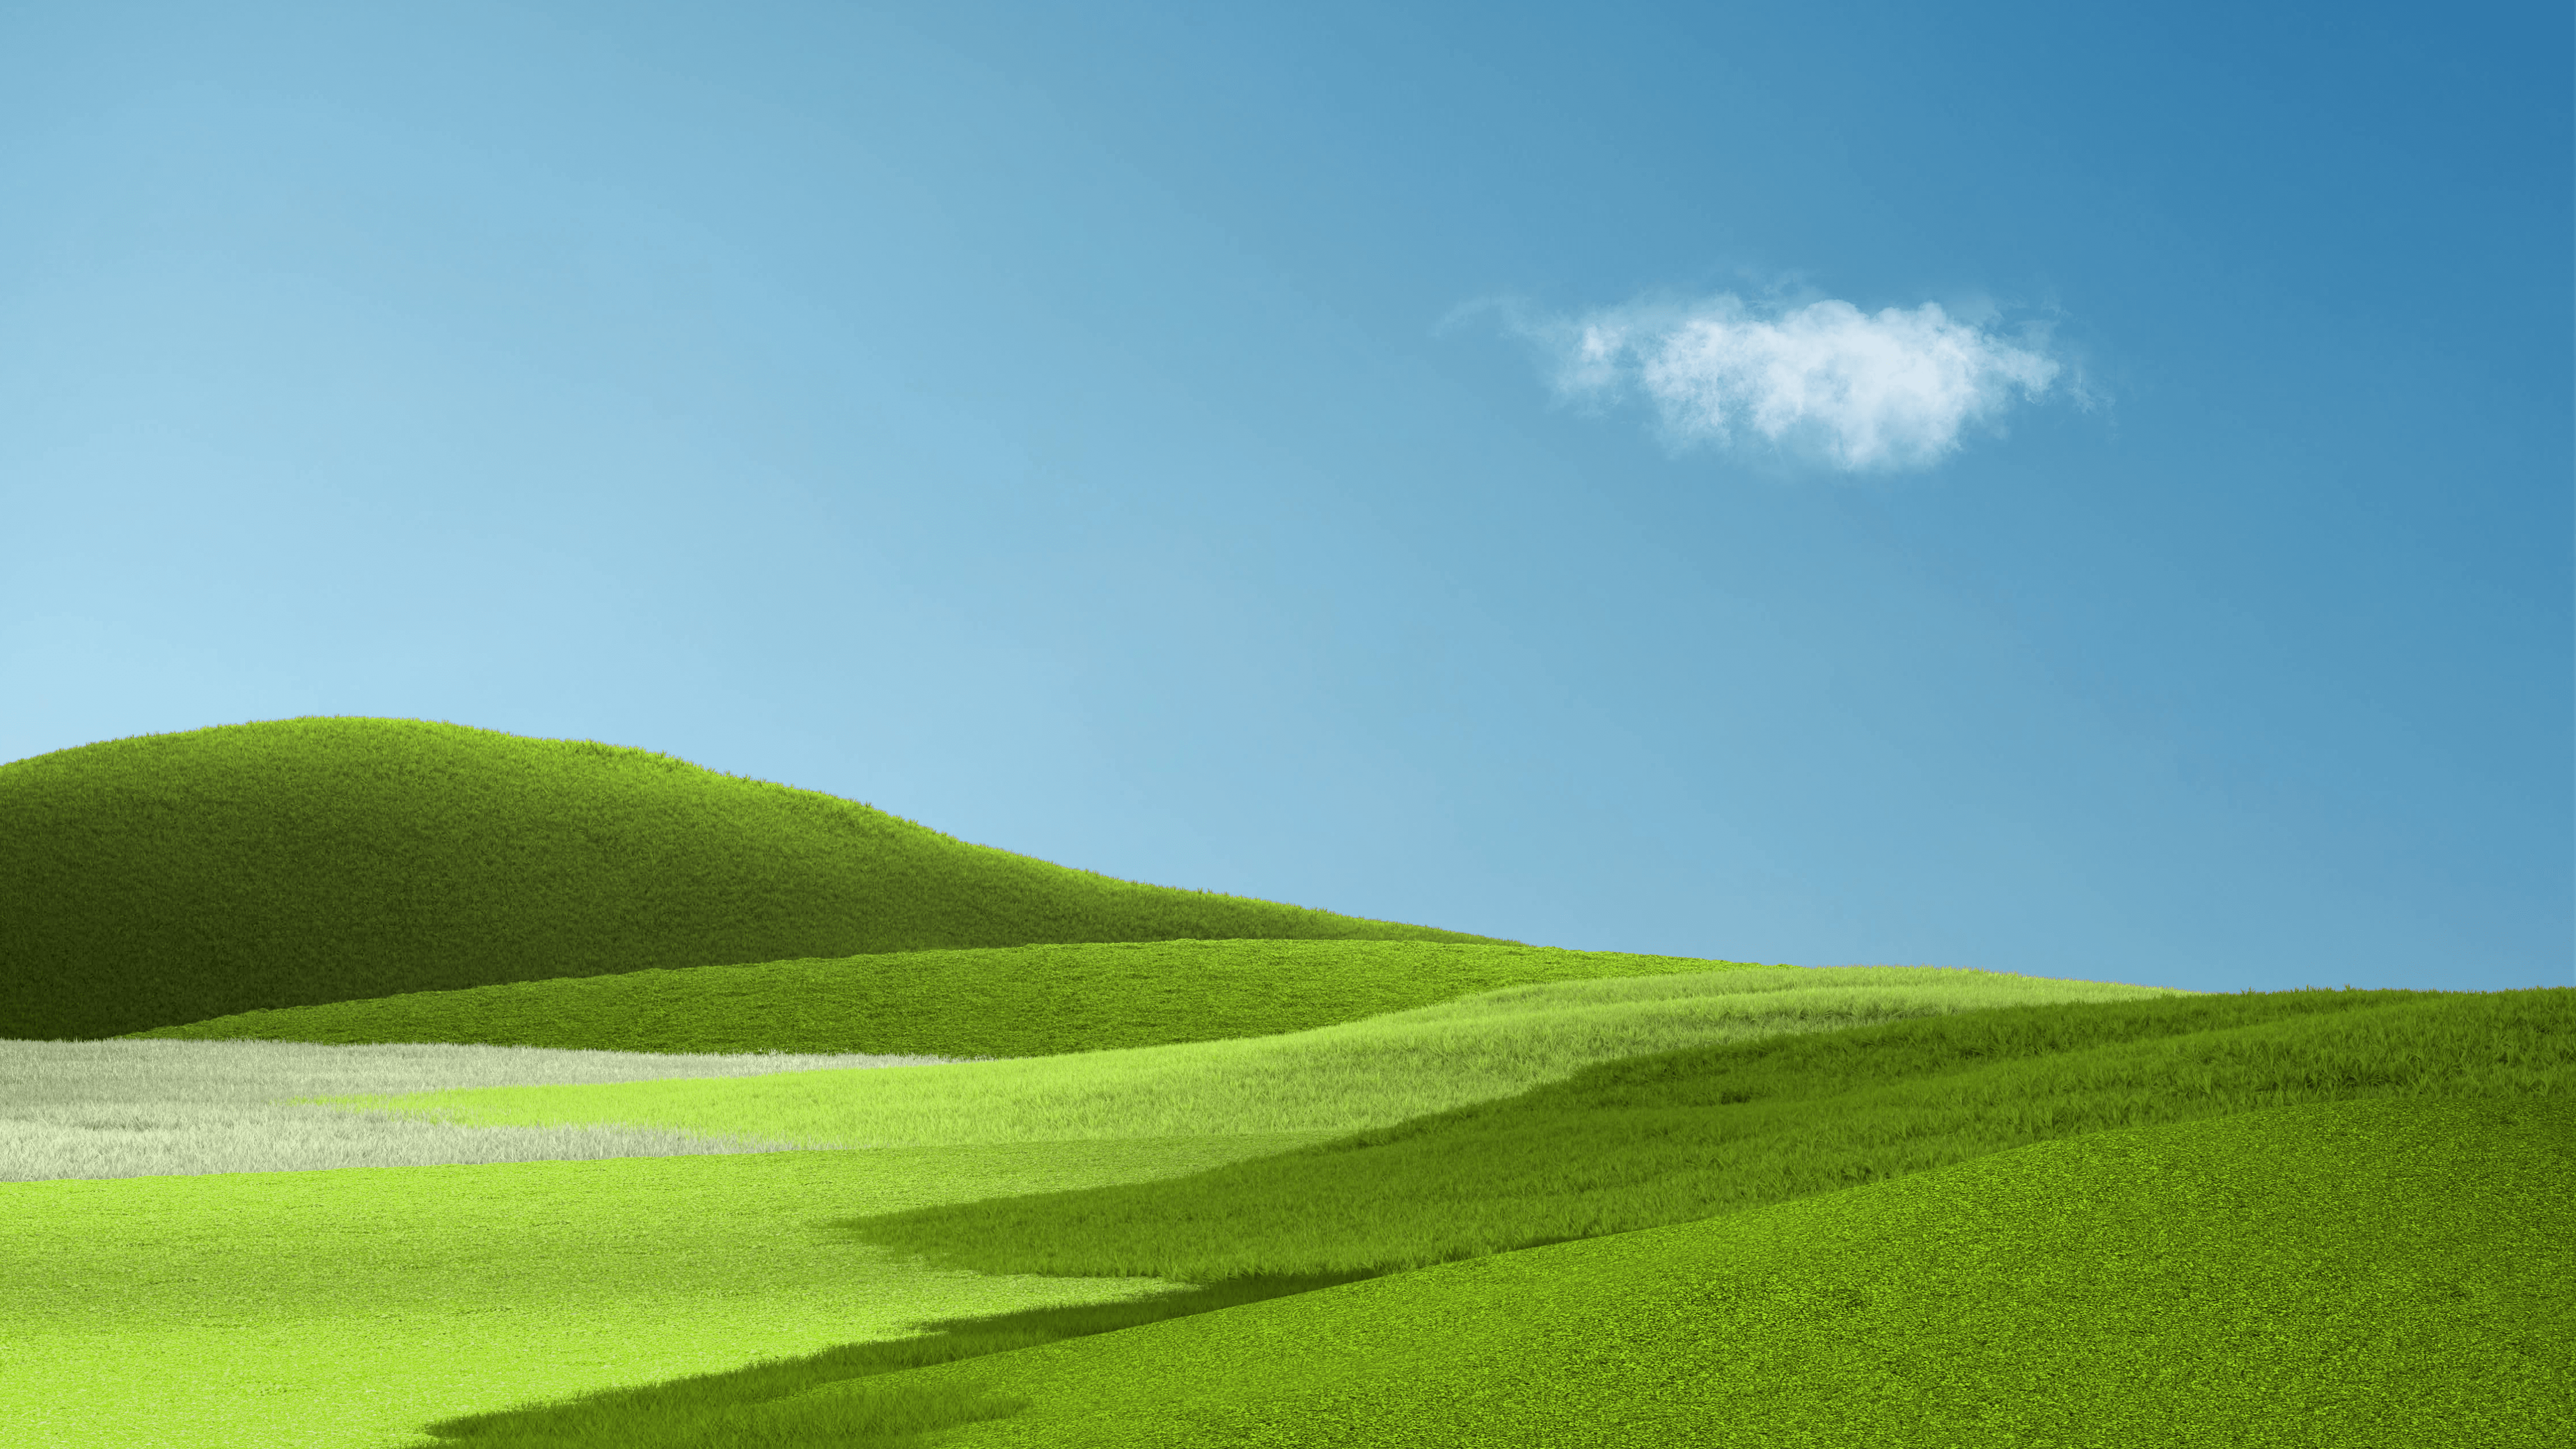 A grassy hill with a single cloud in the sky - Landscape, scenery, nature